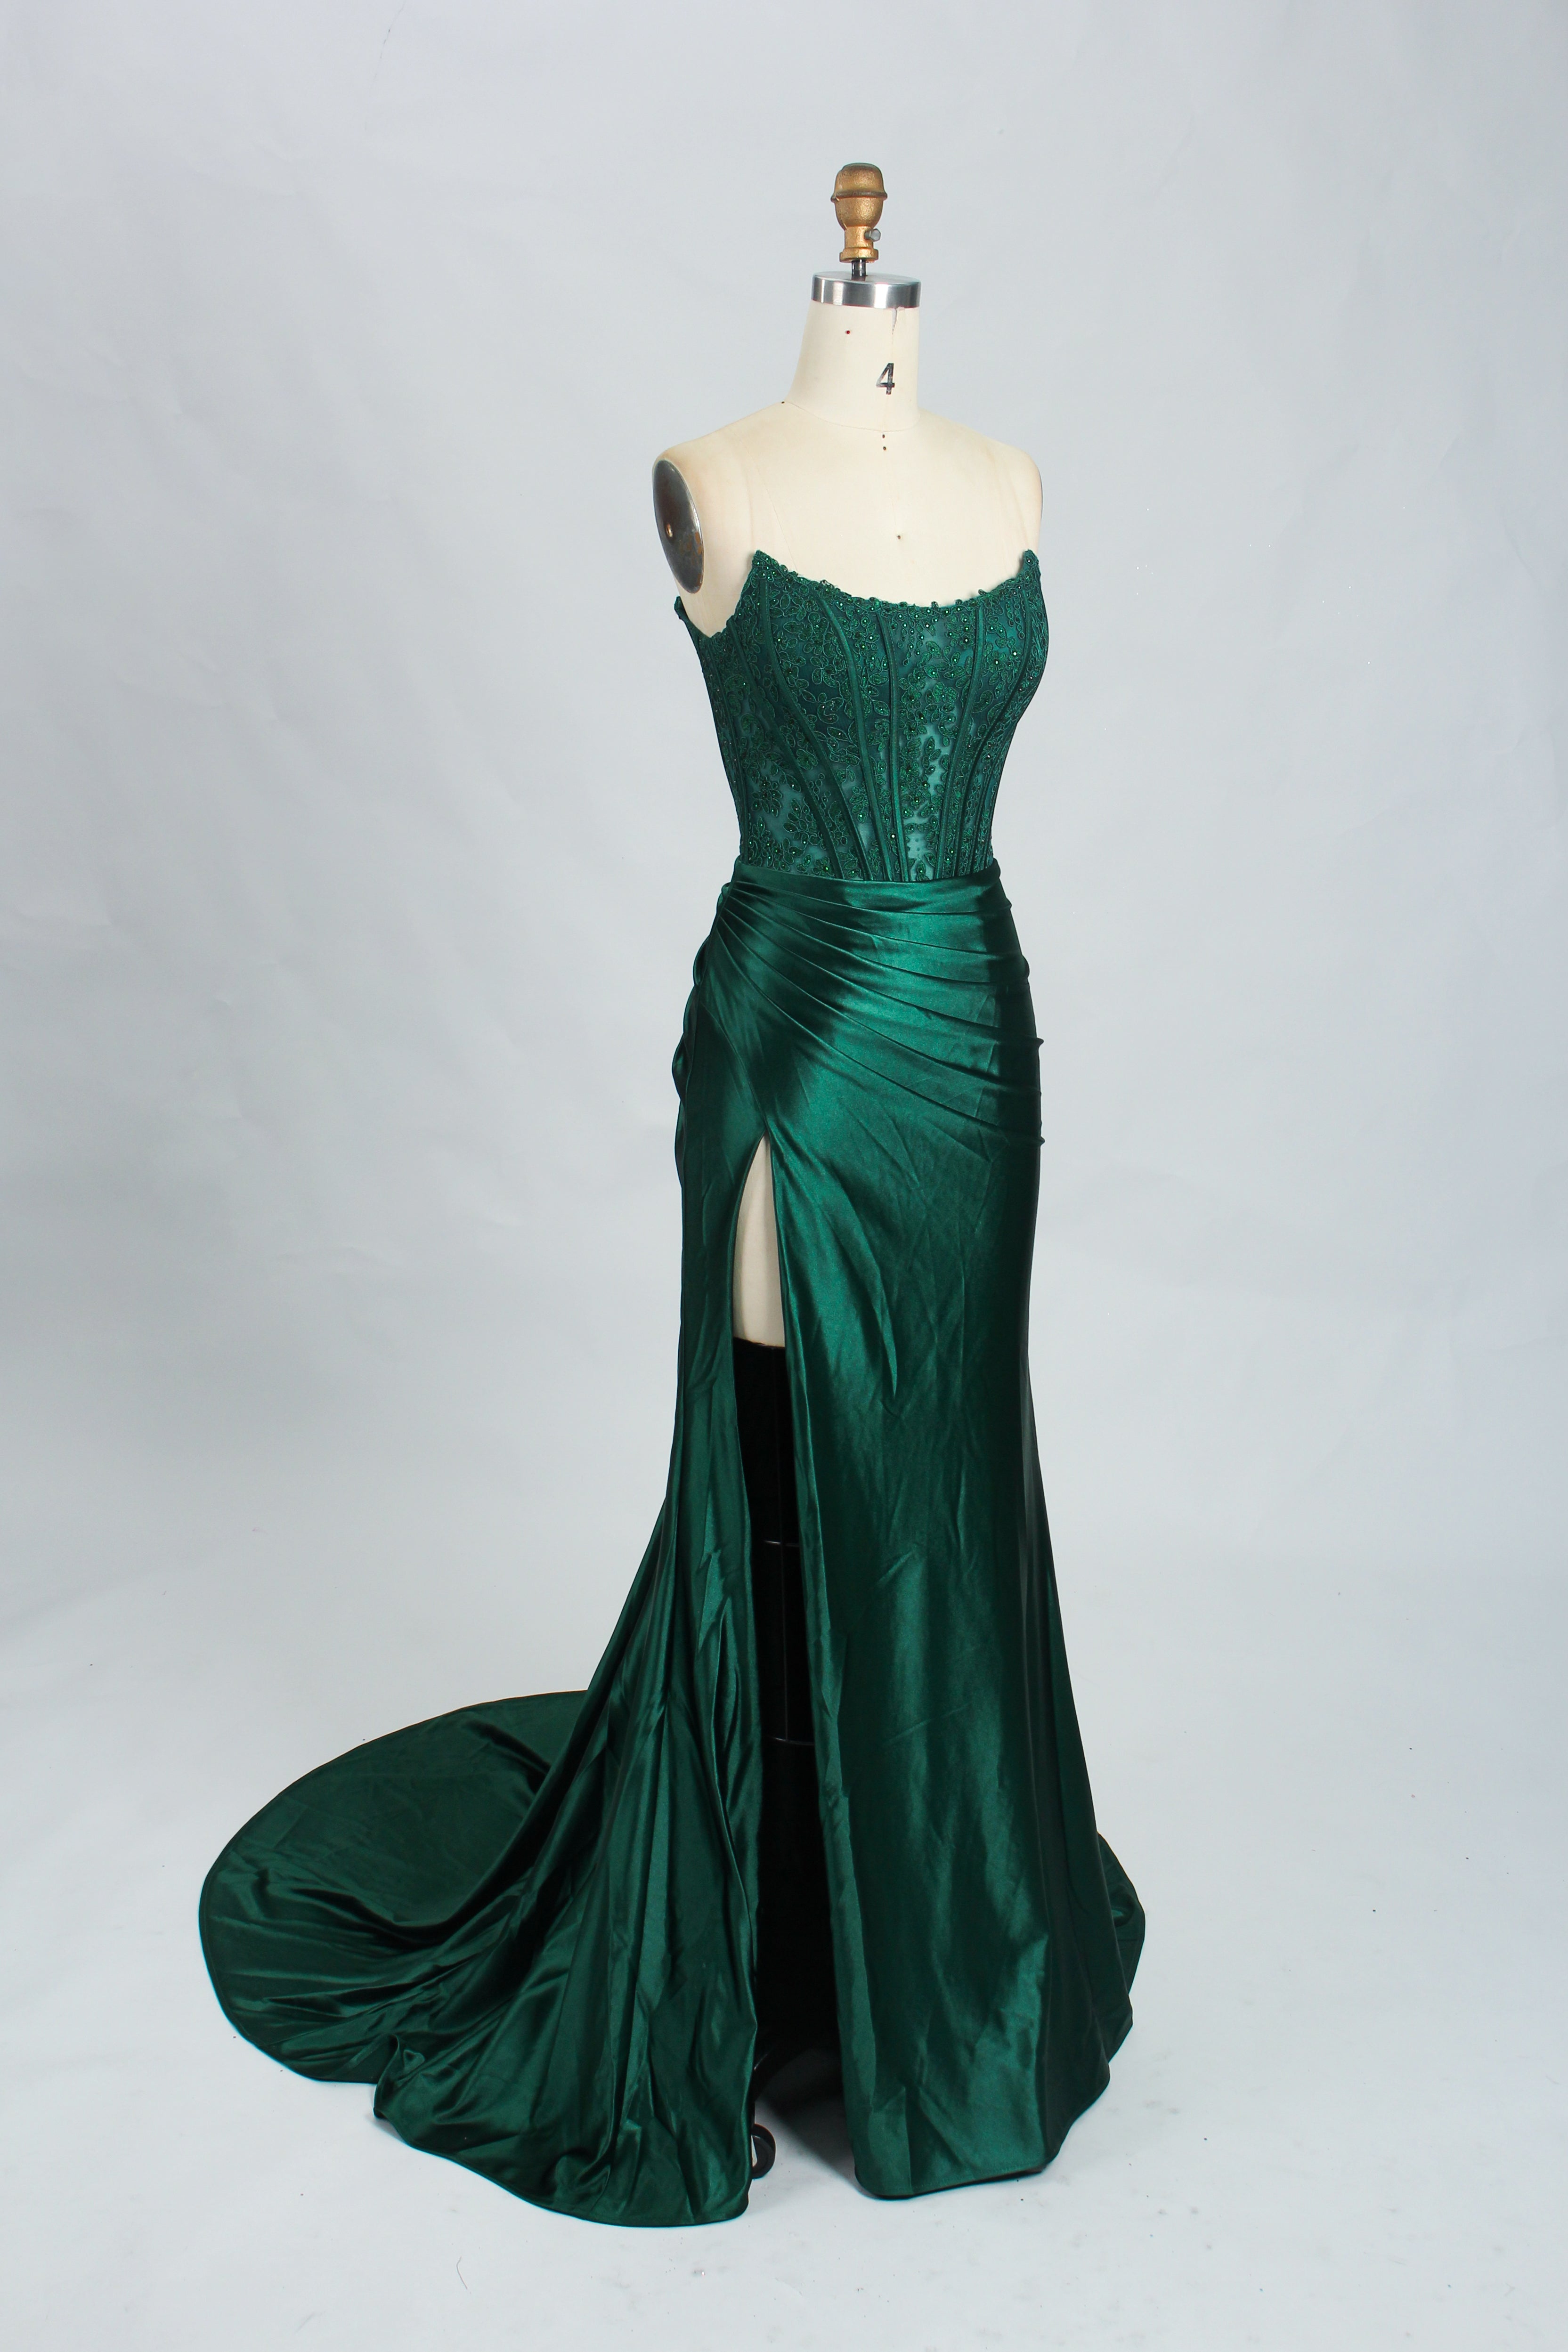 Honey Couture AUGUST Emerald Green Strapless Embellished Bustier Satin Mermaid Formal Dress